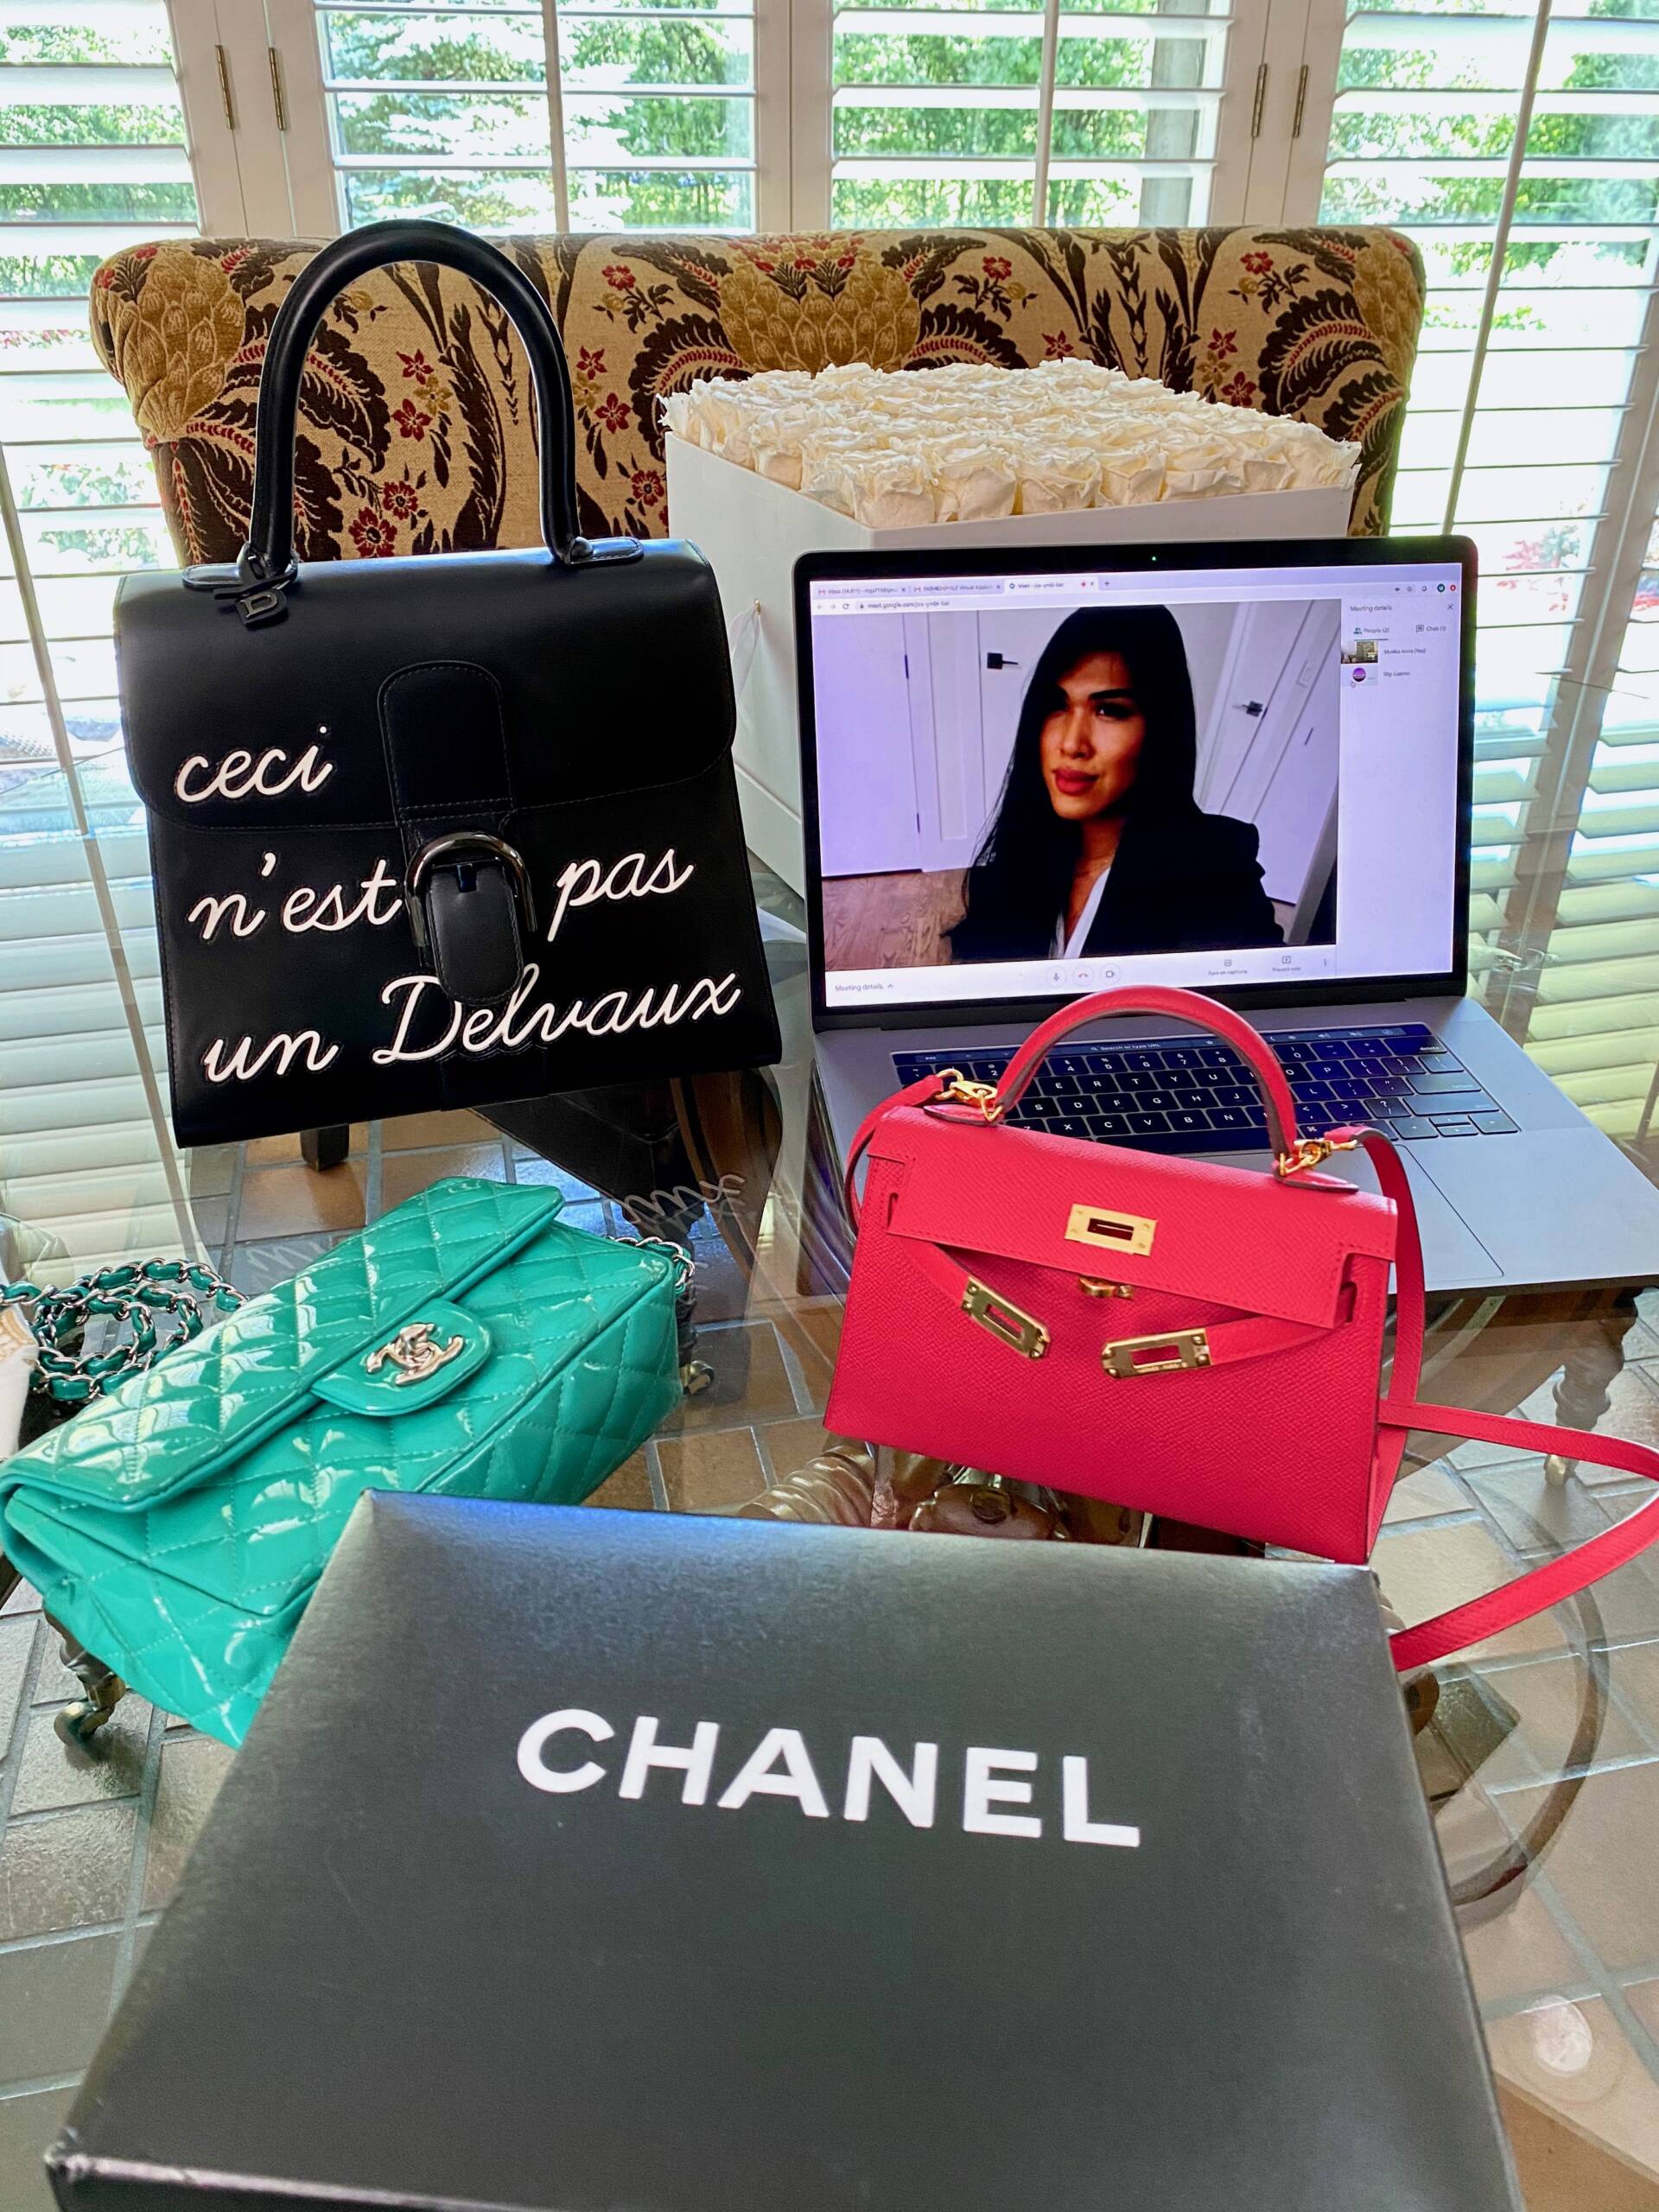 Cracking the Code: Fashionphile's Luxury Authentication Practices